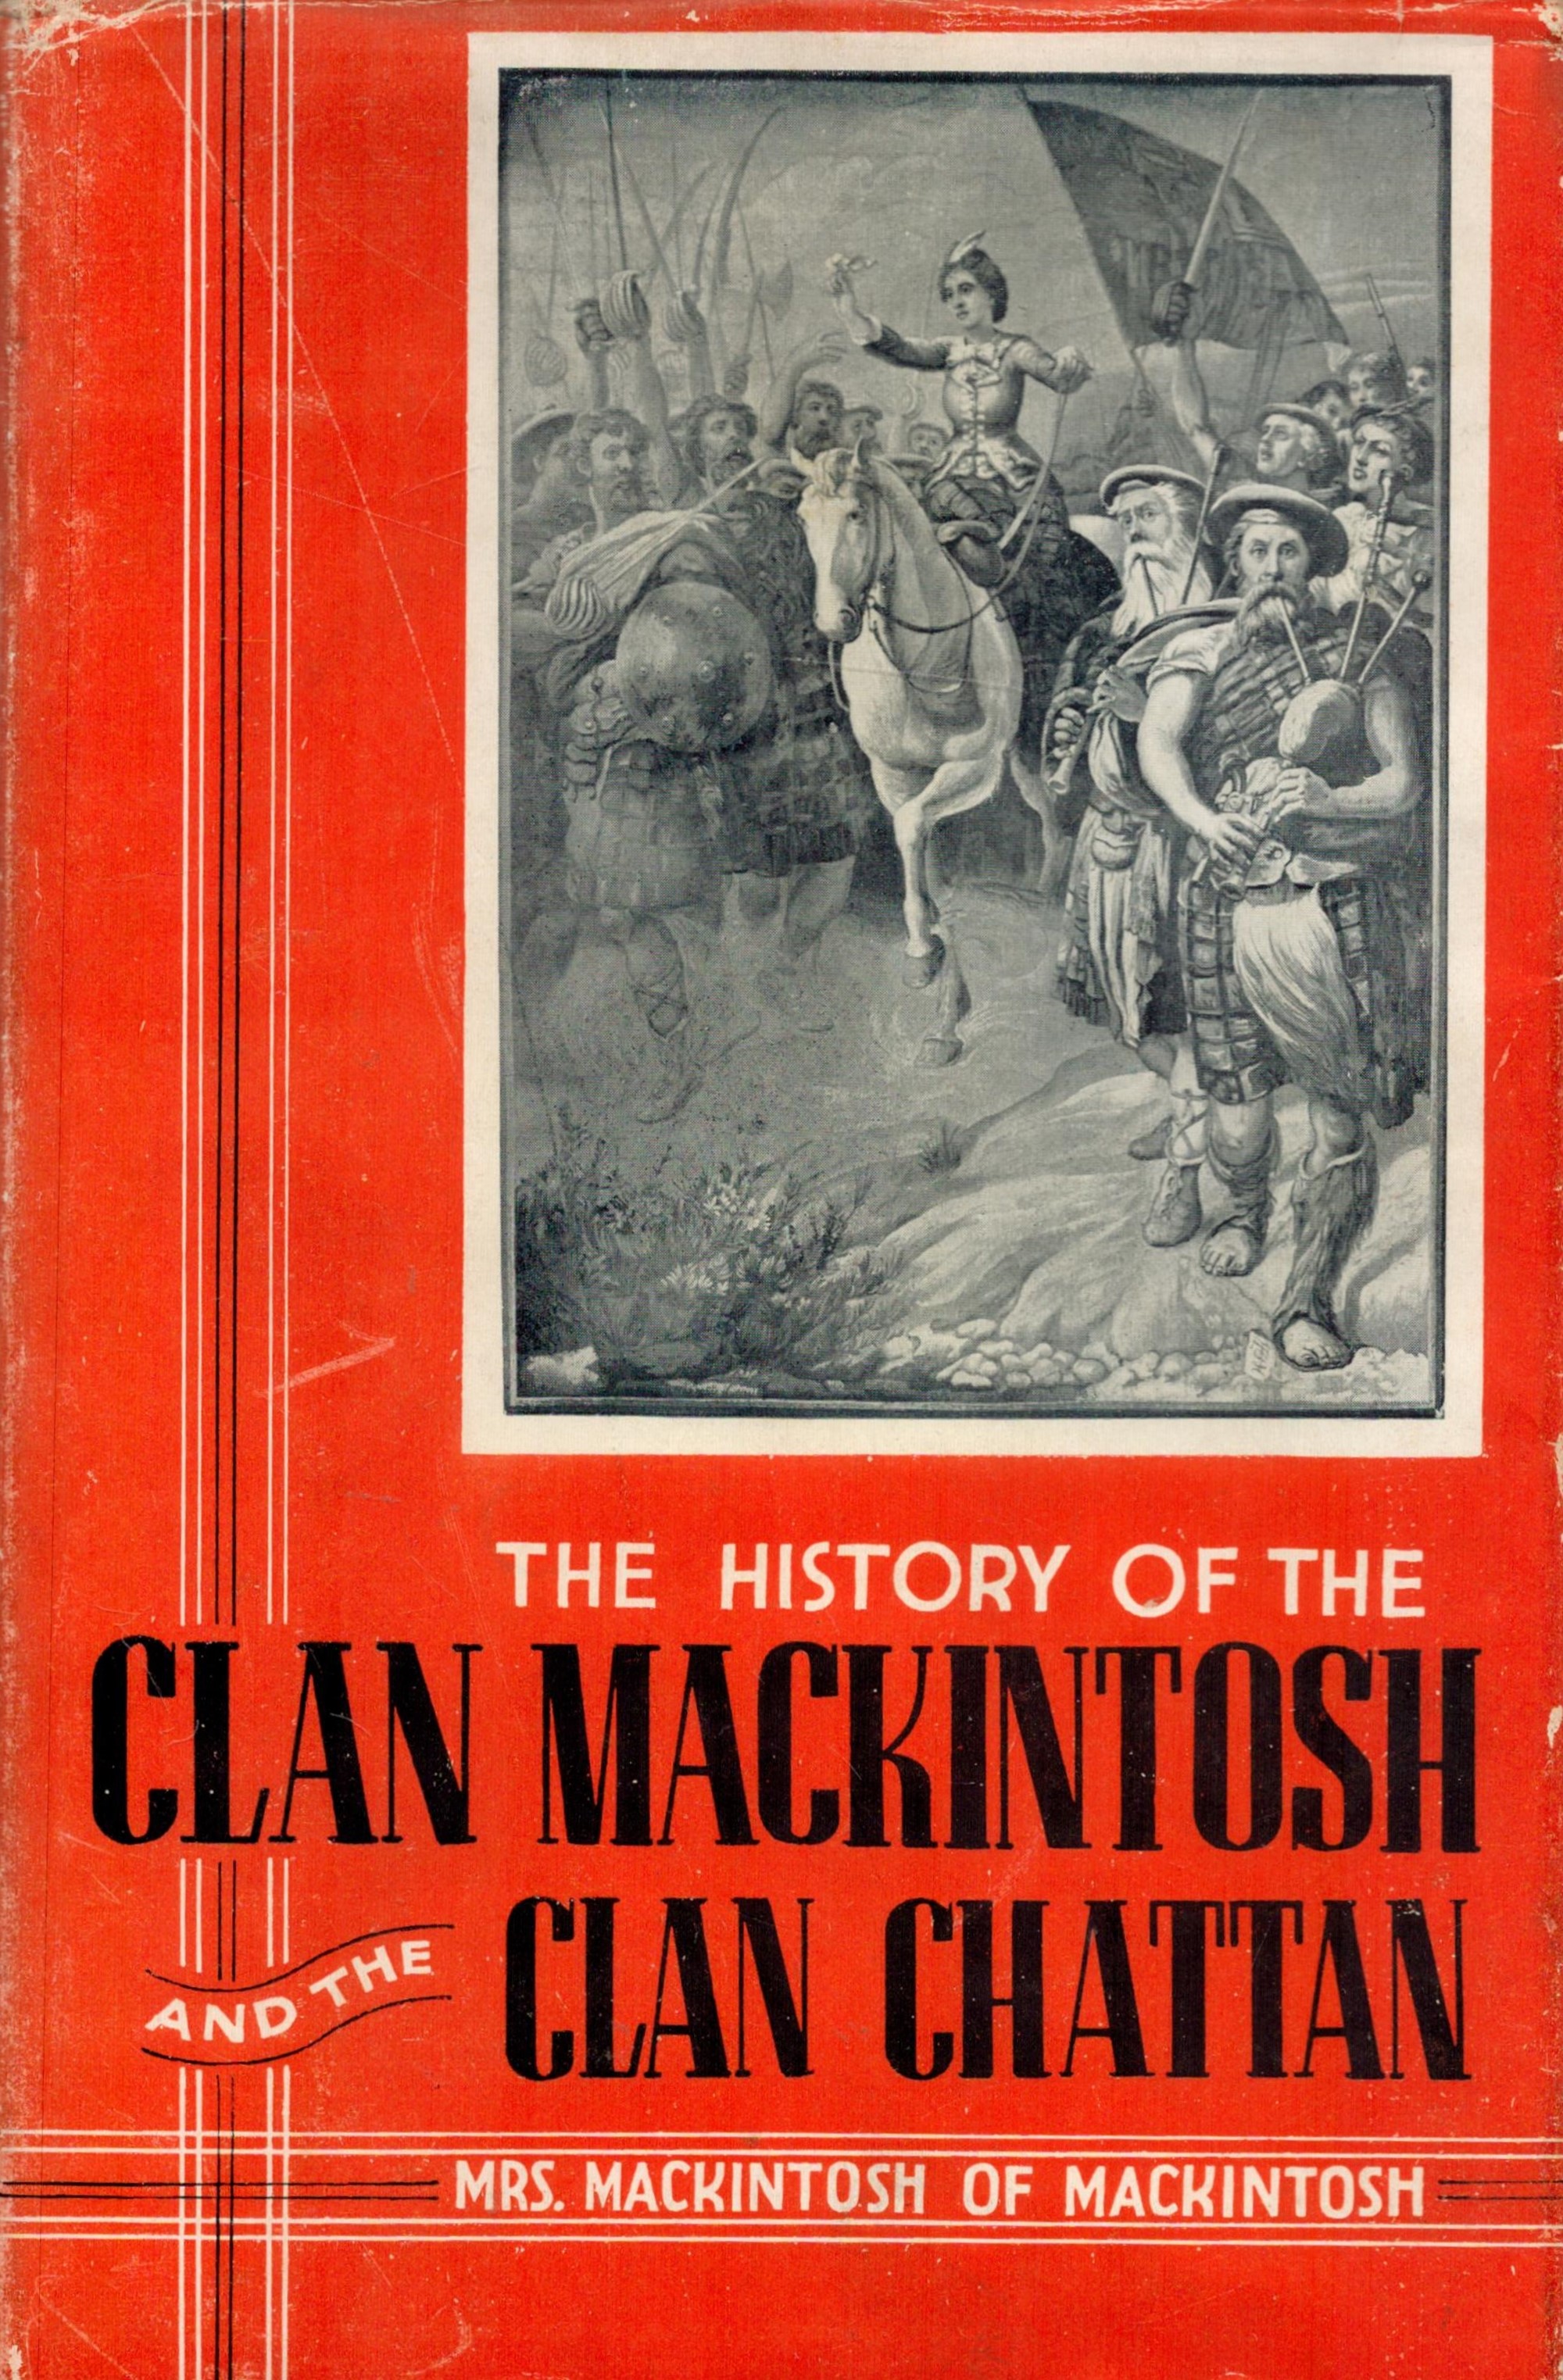 The History of Clan Mackintosh and the Clan Chattan by M Mackintosh Hardback Book 1948 First Edition - Image 3 of 4